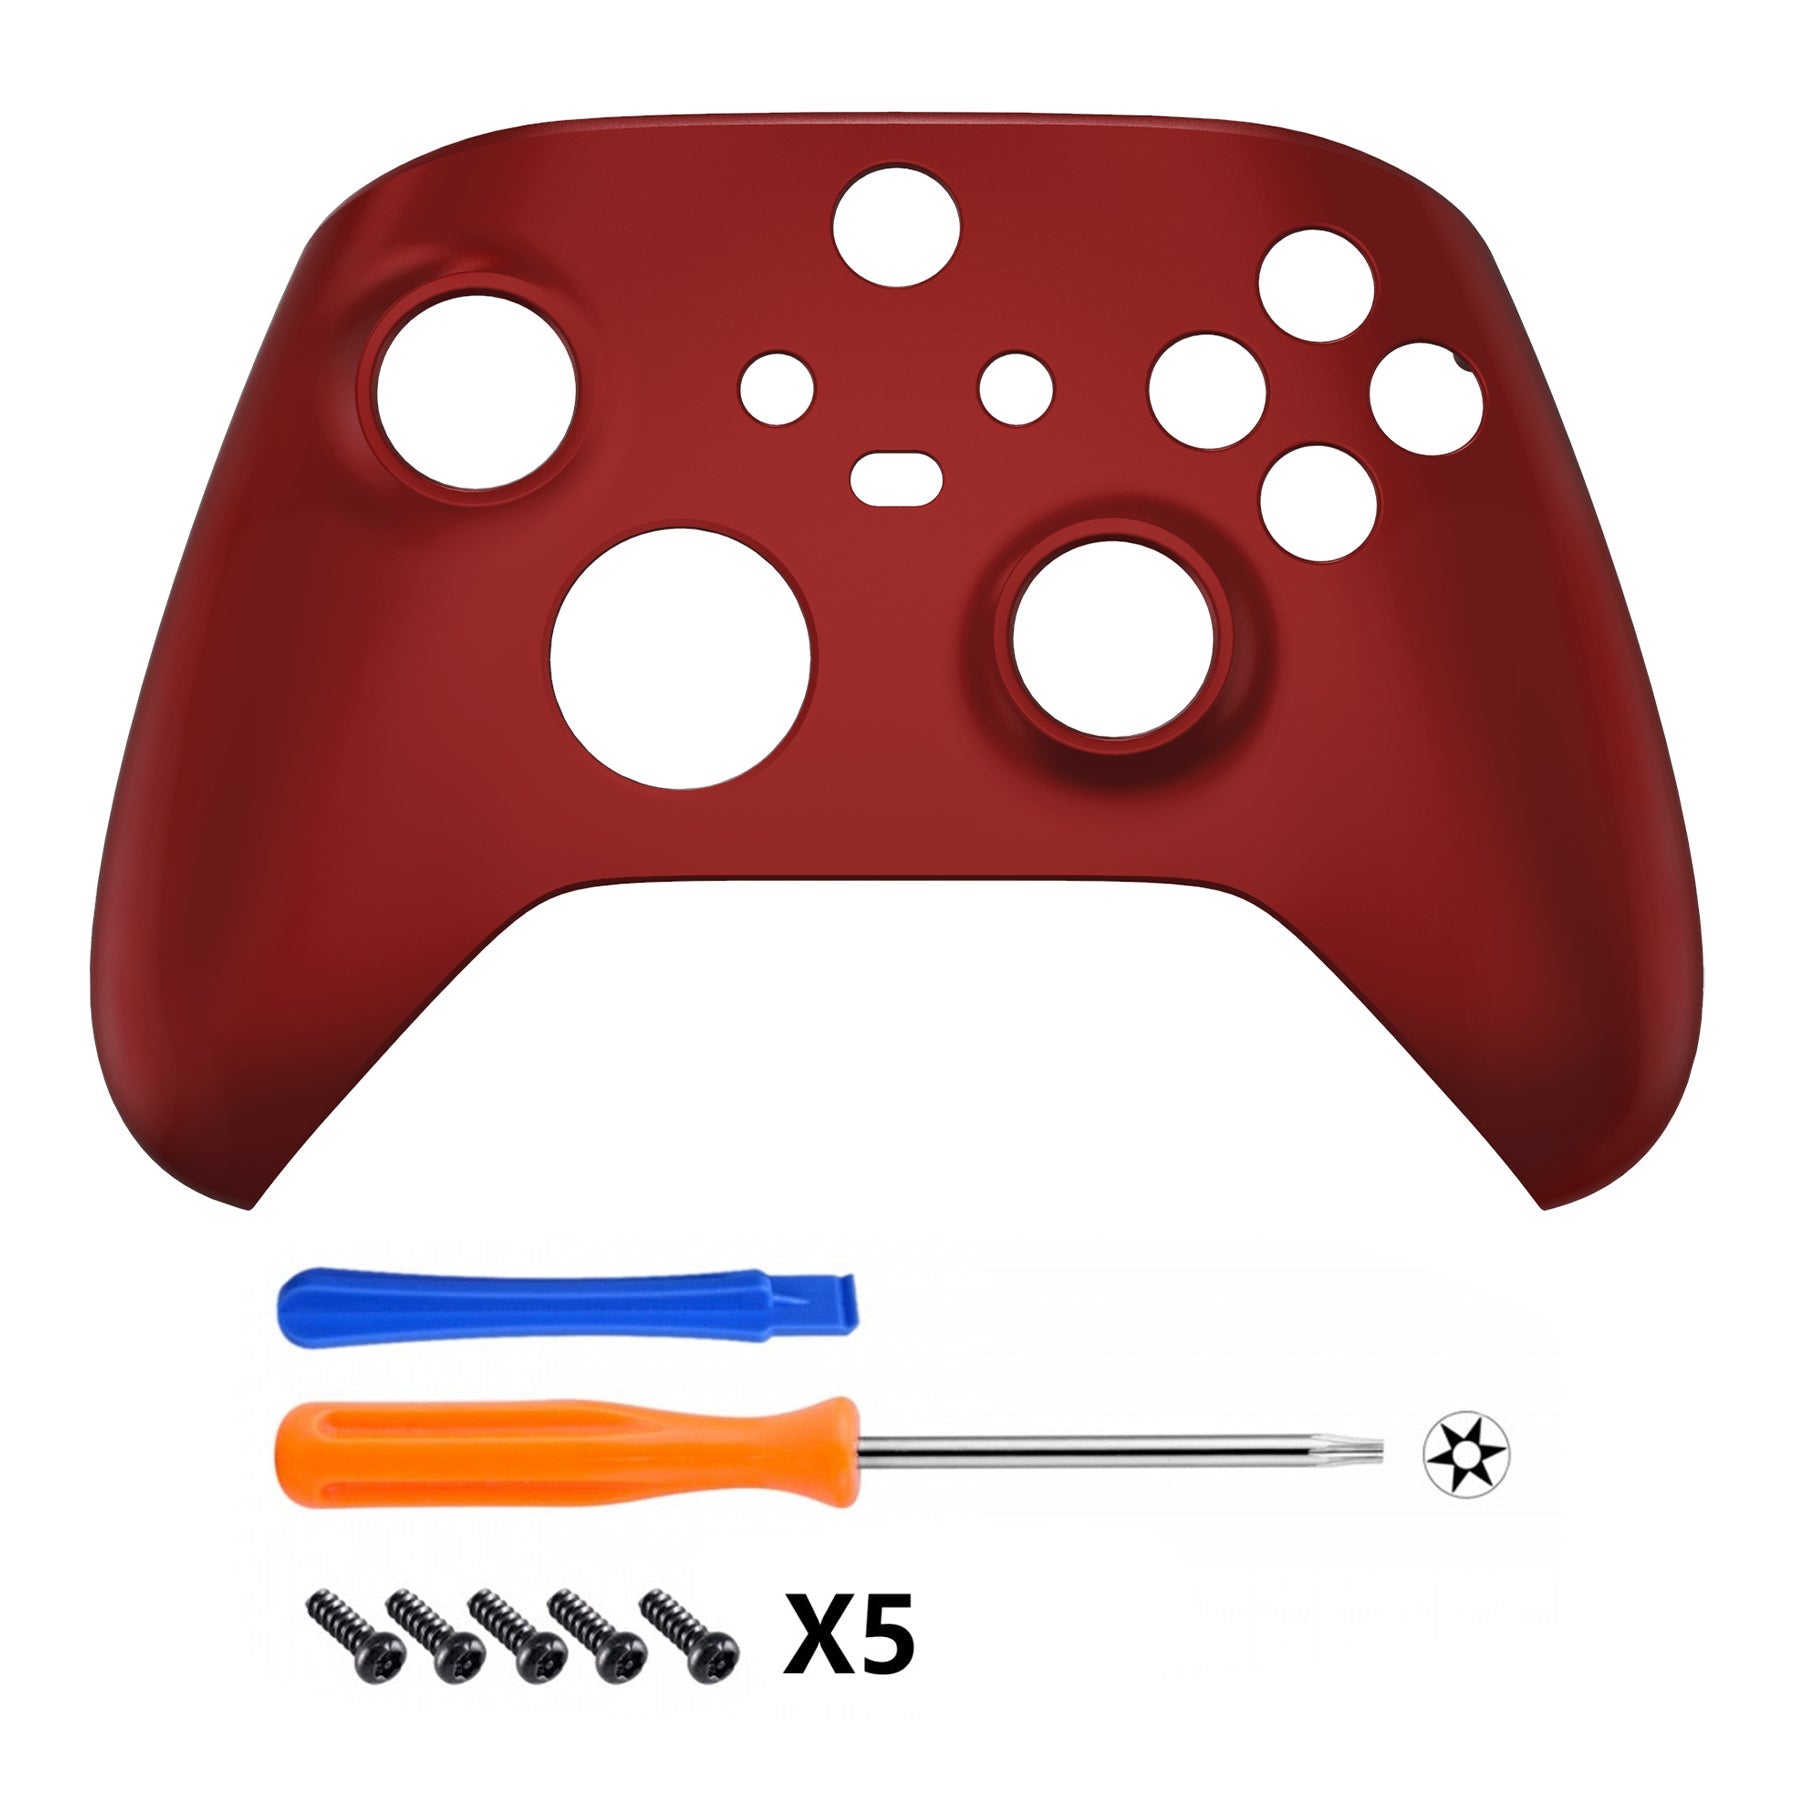 eXtremeRate Retail Scarlet Red Replacement Part Faceplate, Soft Touch Grip Housing Shell Case for Xbox Series S & Xbox Series X Controller Accessories - Controller NOT Included - FX3P303